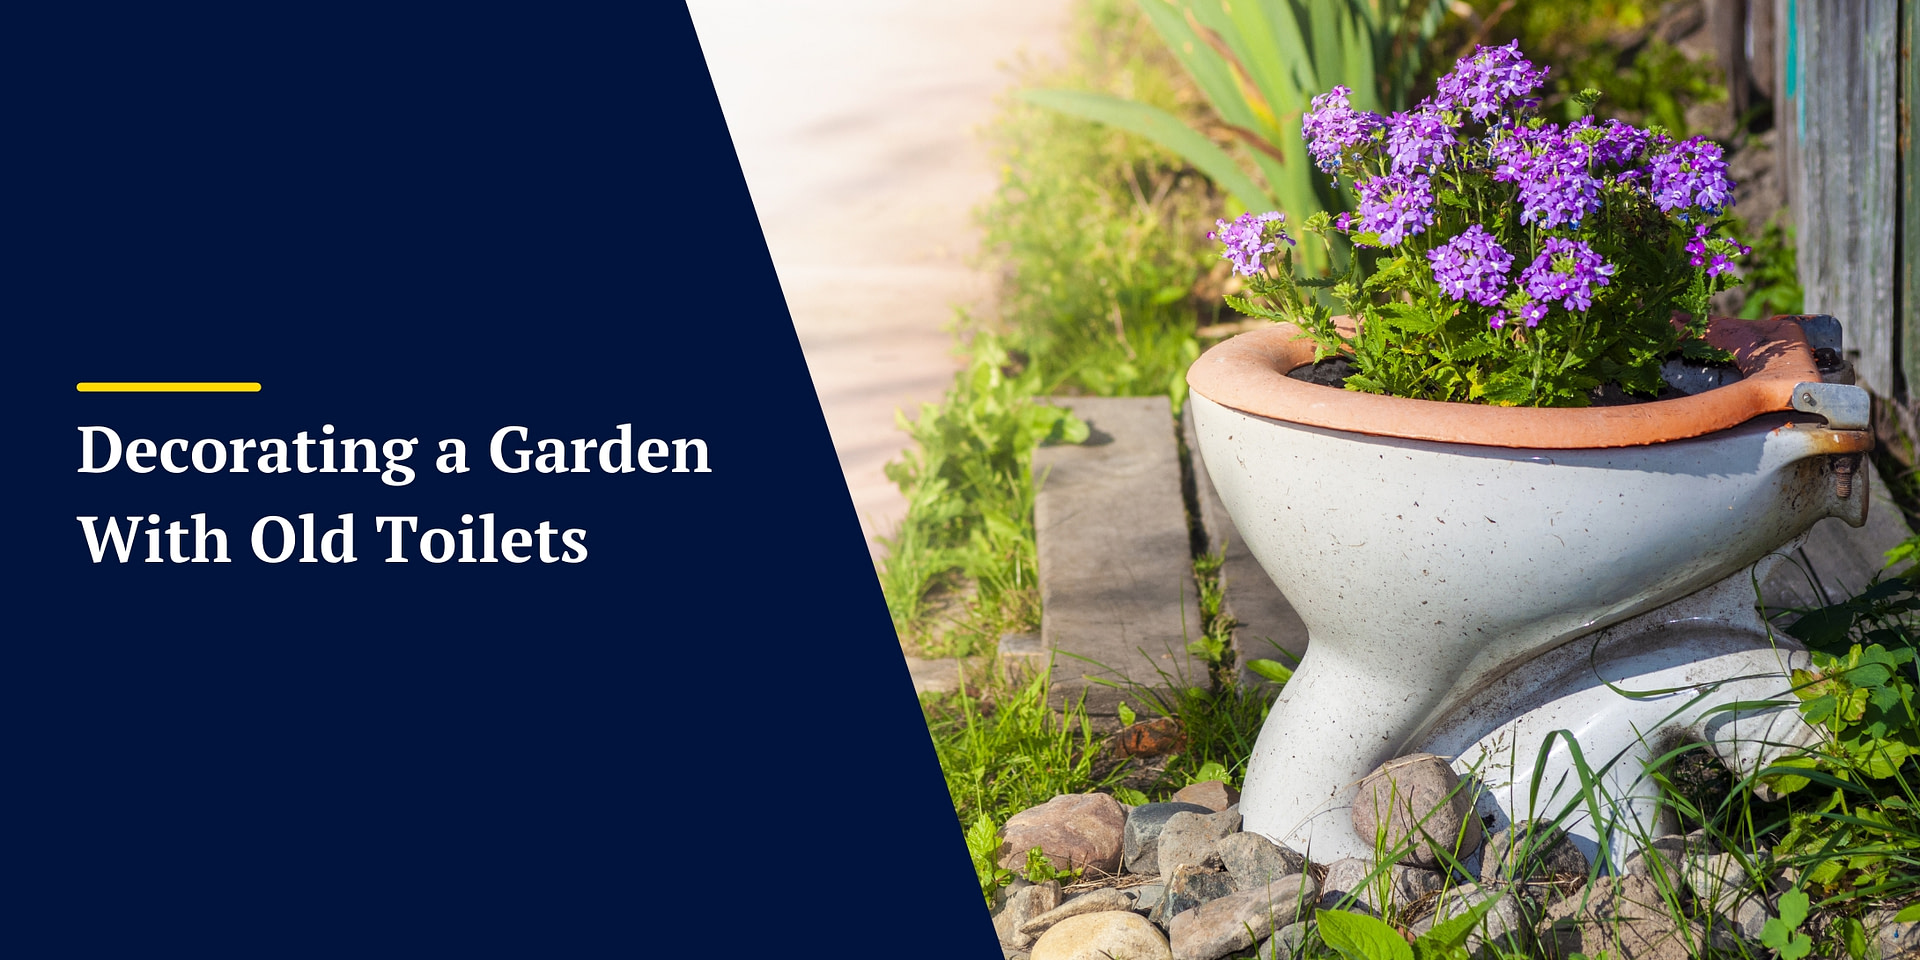 Decorating a Garden With Old Toilets